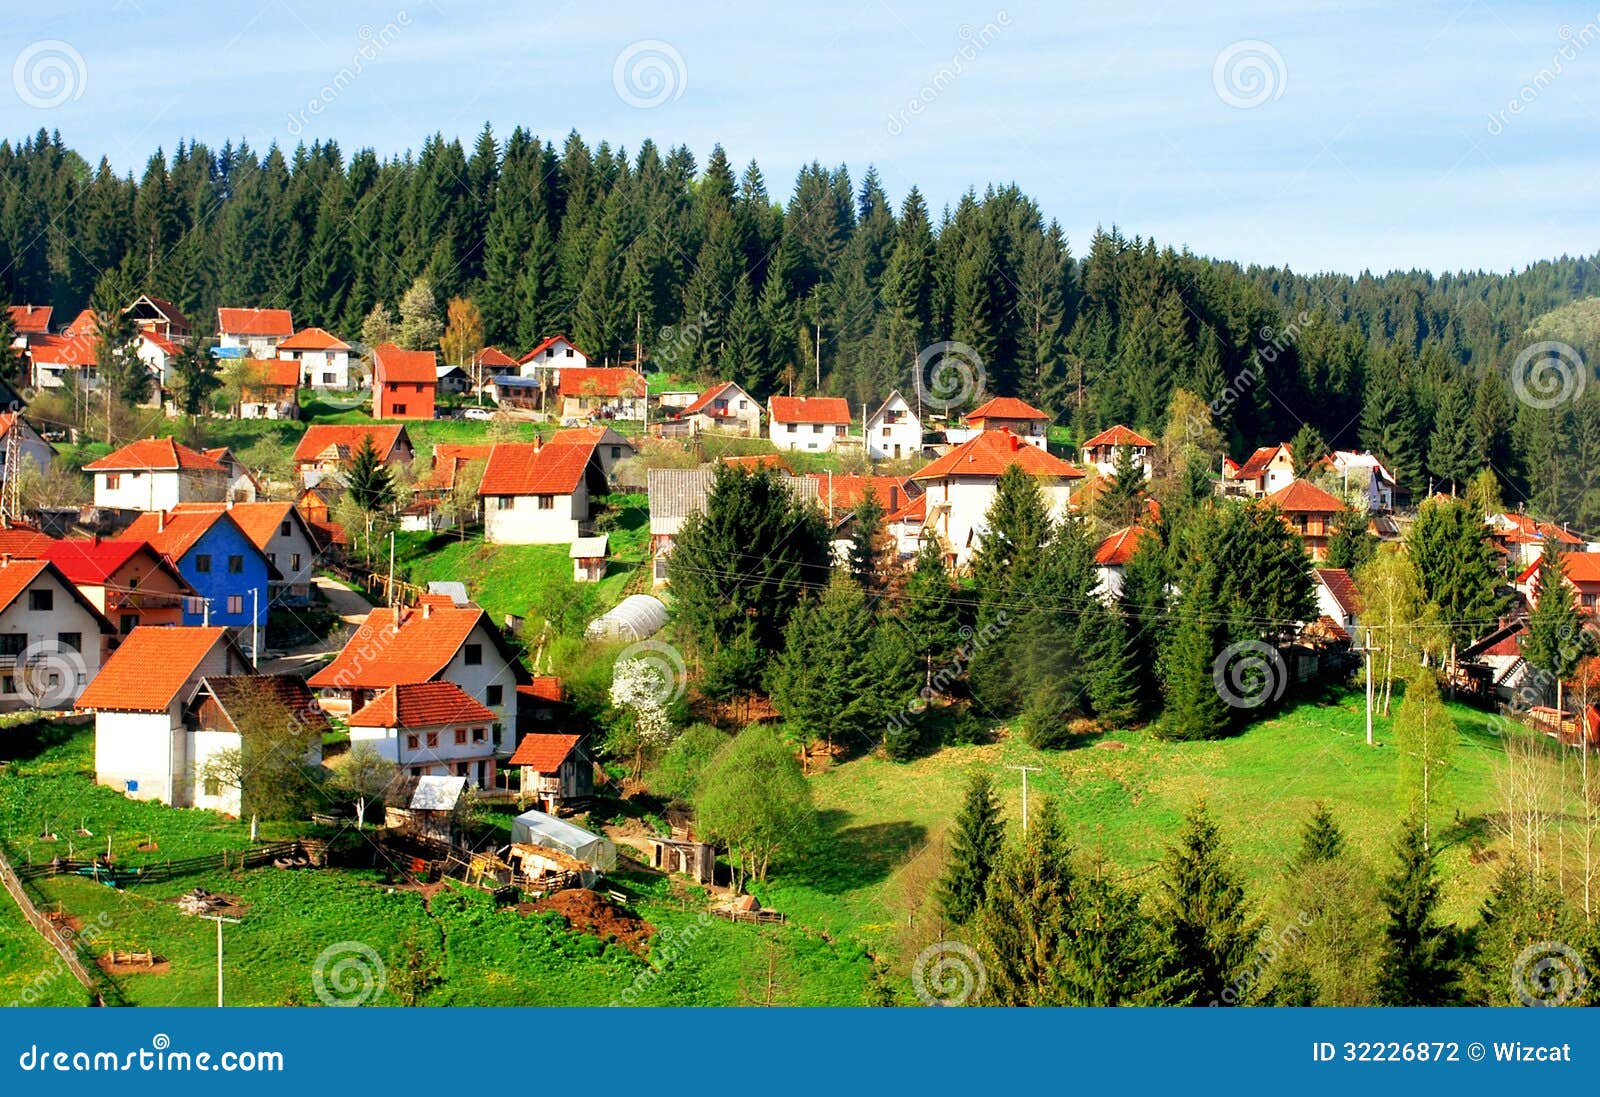 white houses with red-tiled roof by woods